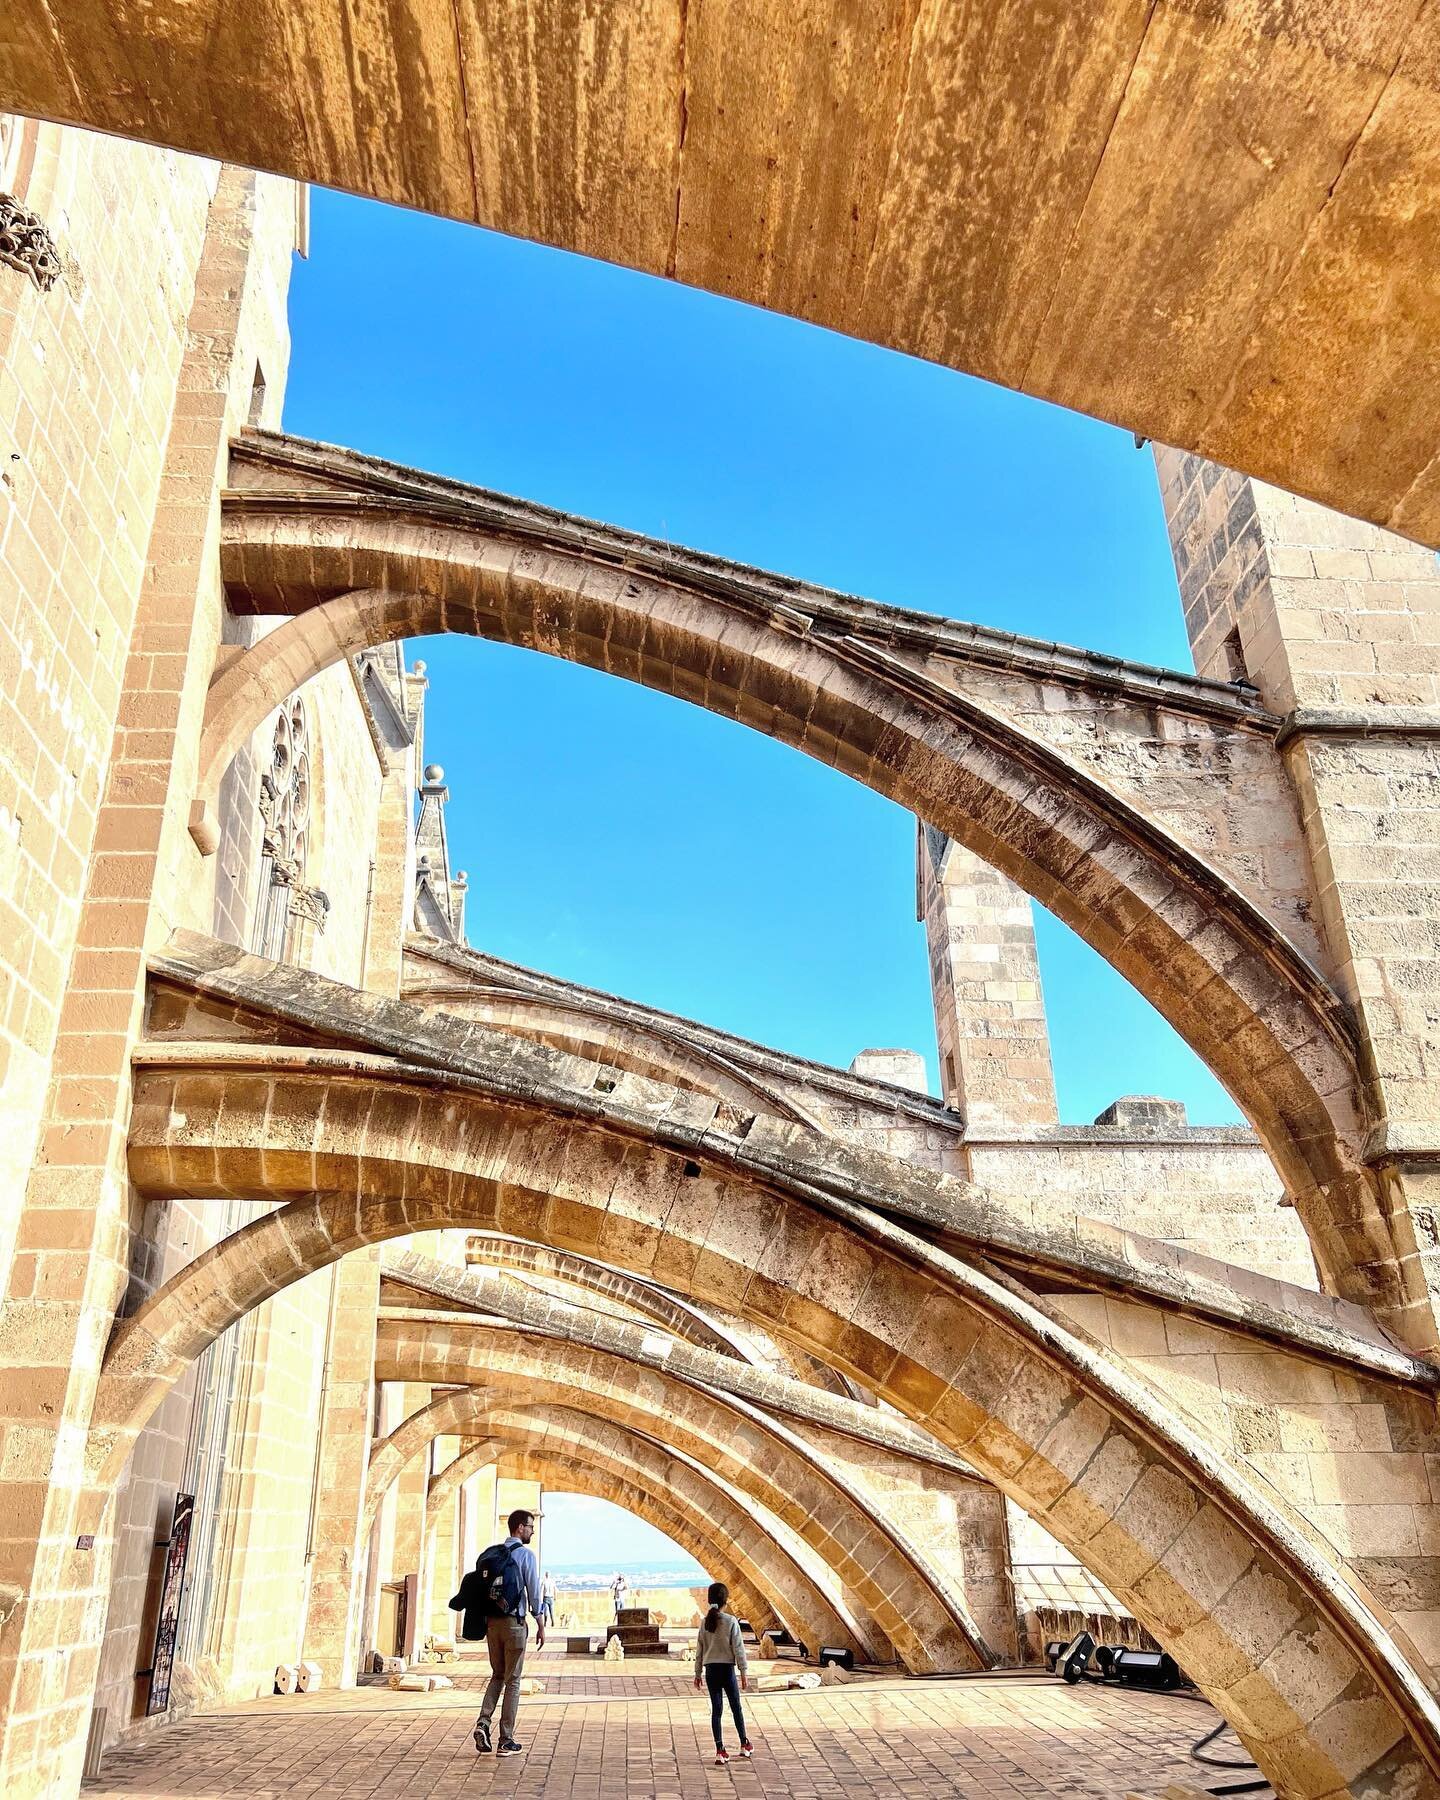 This unique, elevated space overlooking the Mediterranean&hellip; framed by the arches of the flying buttresses. Their scale and  spans are extraordinary. #architecture #arquitectura #arquitetura #cathedral #buttress #structure #gothic #laseu #palmad